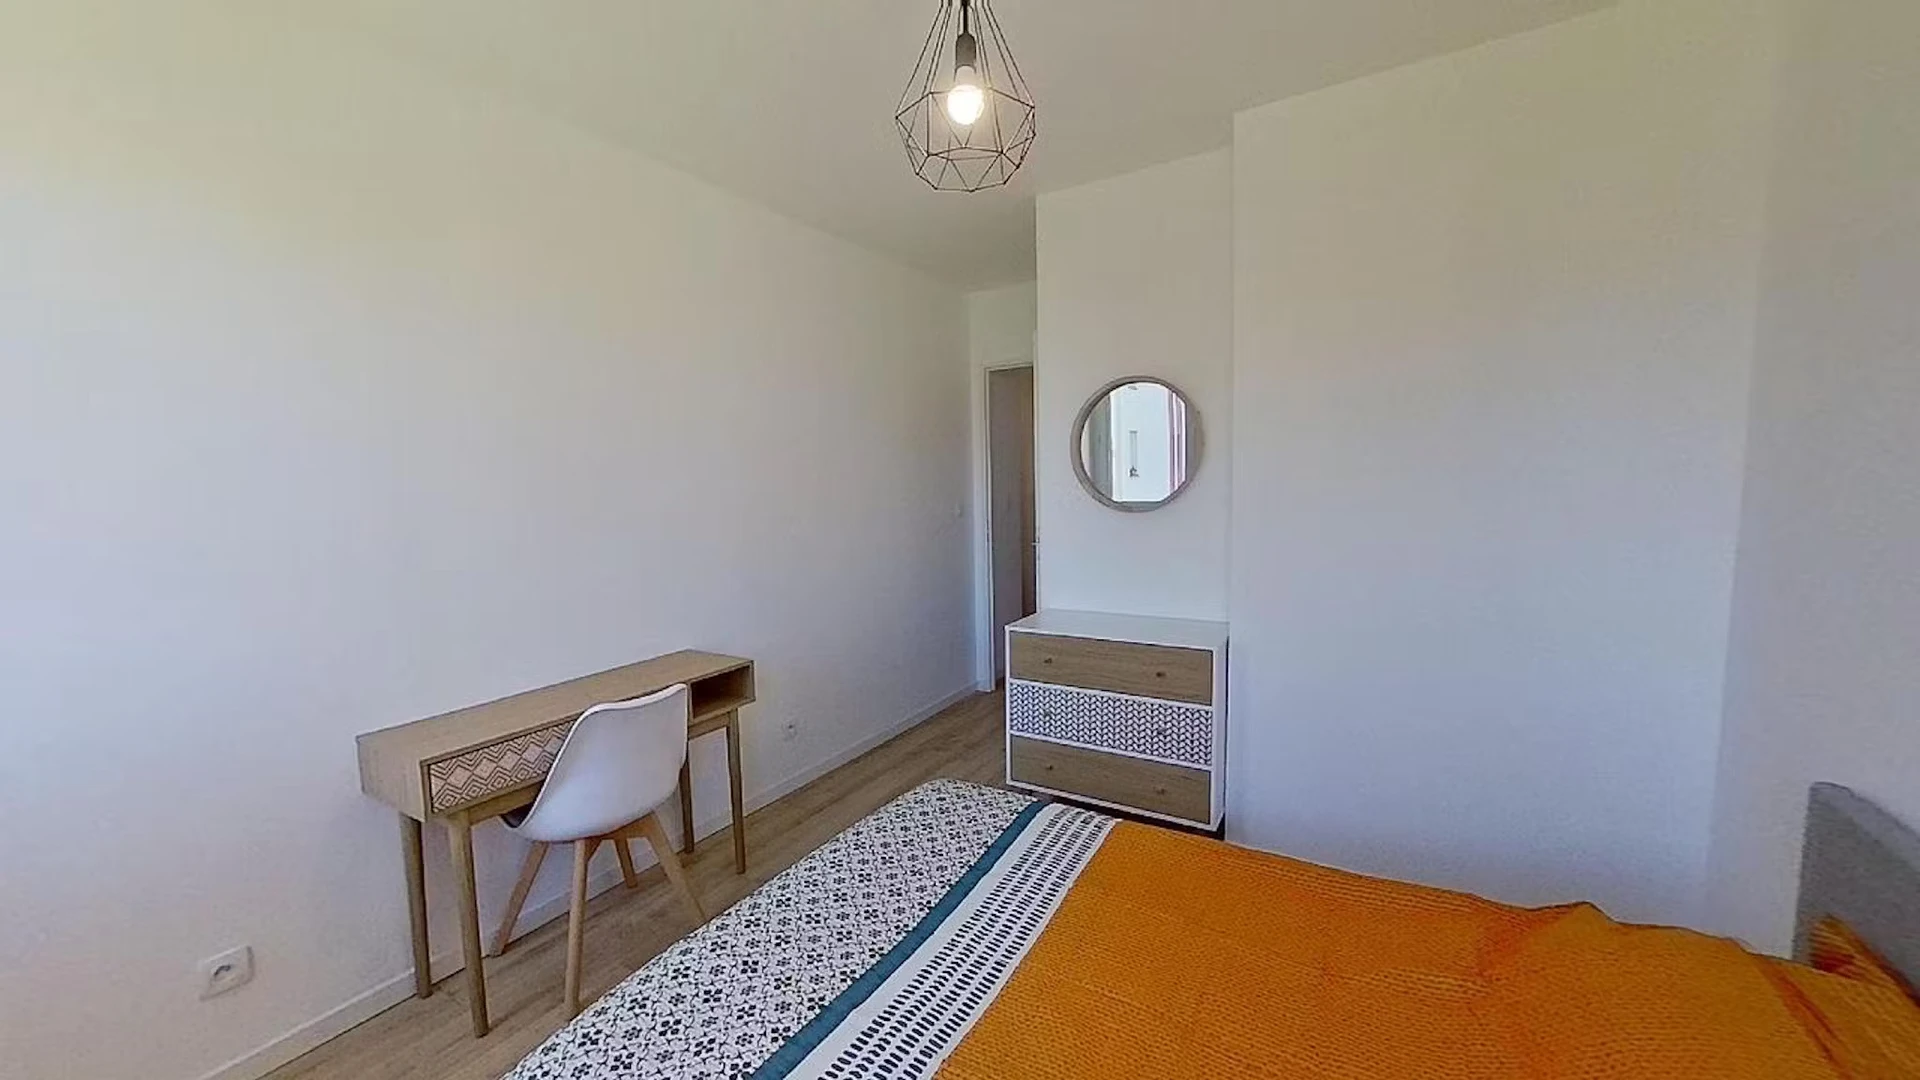 Room for rent in a shared flat in Le Havre